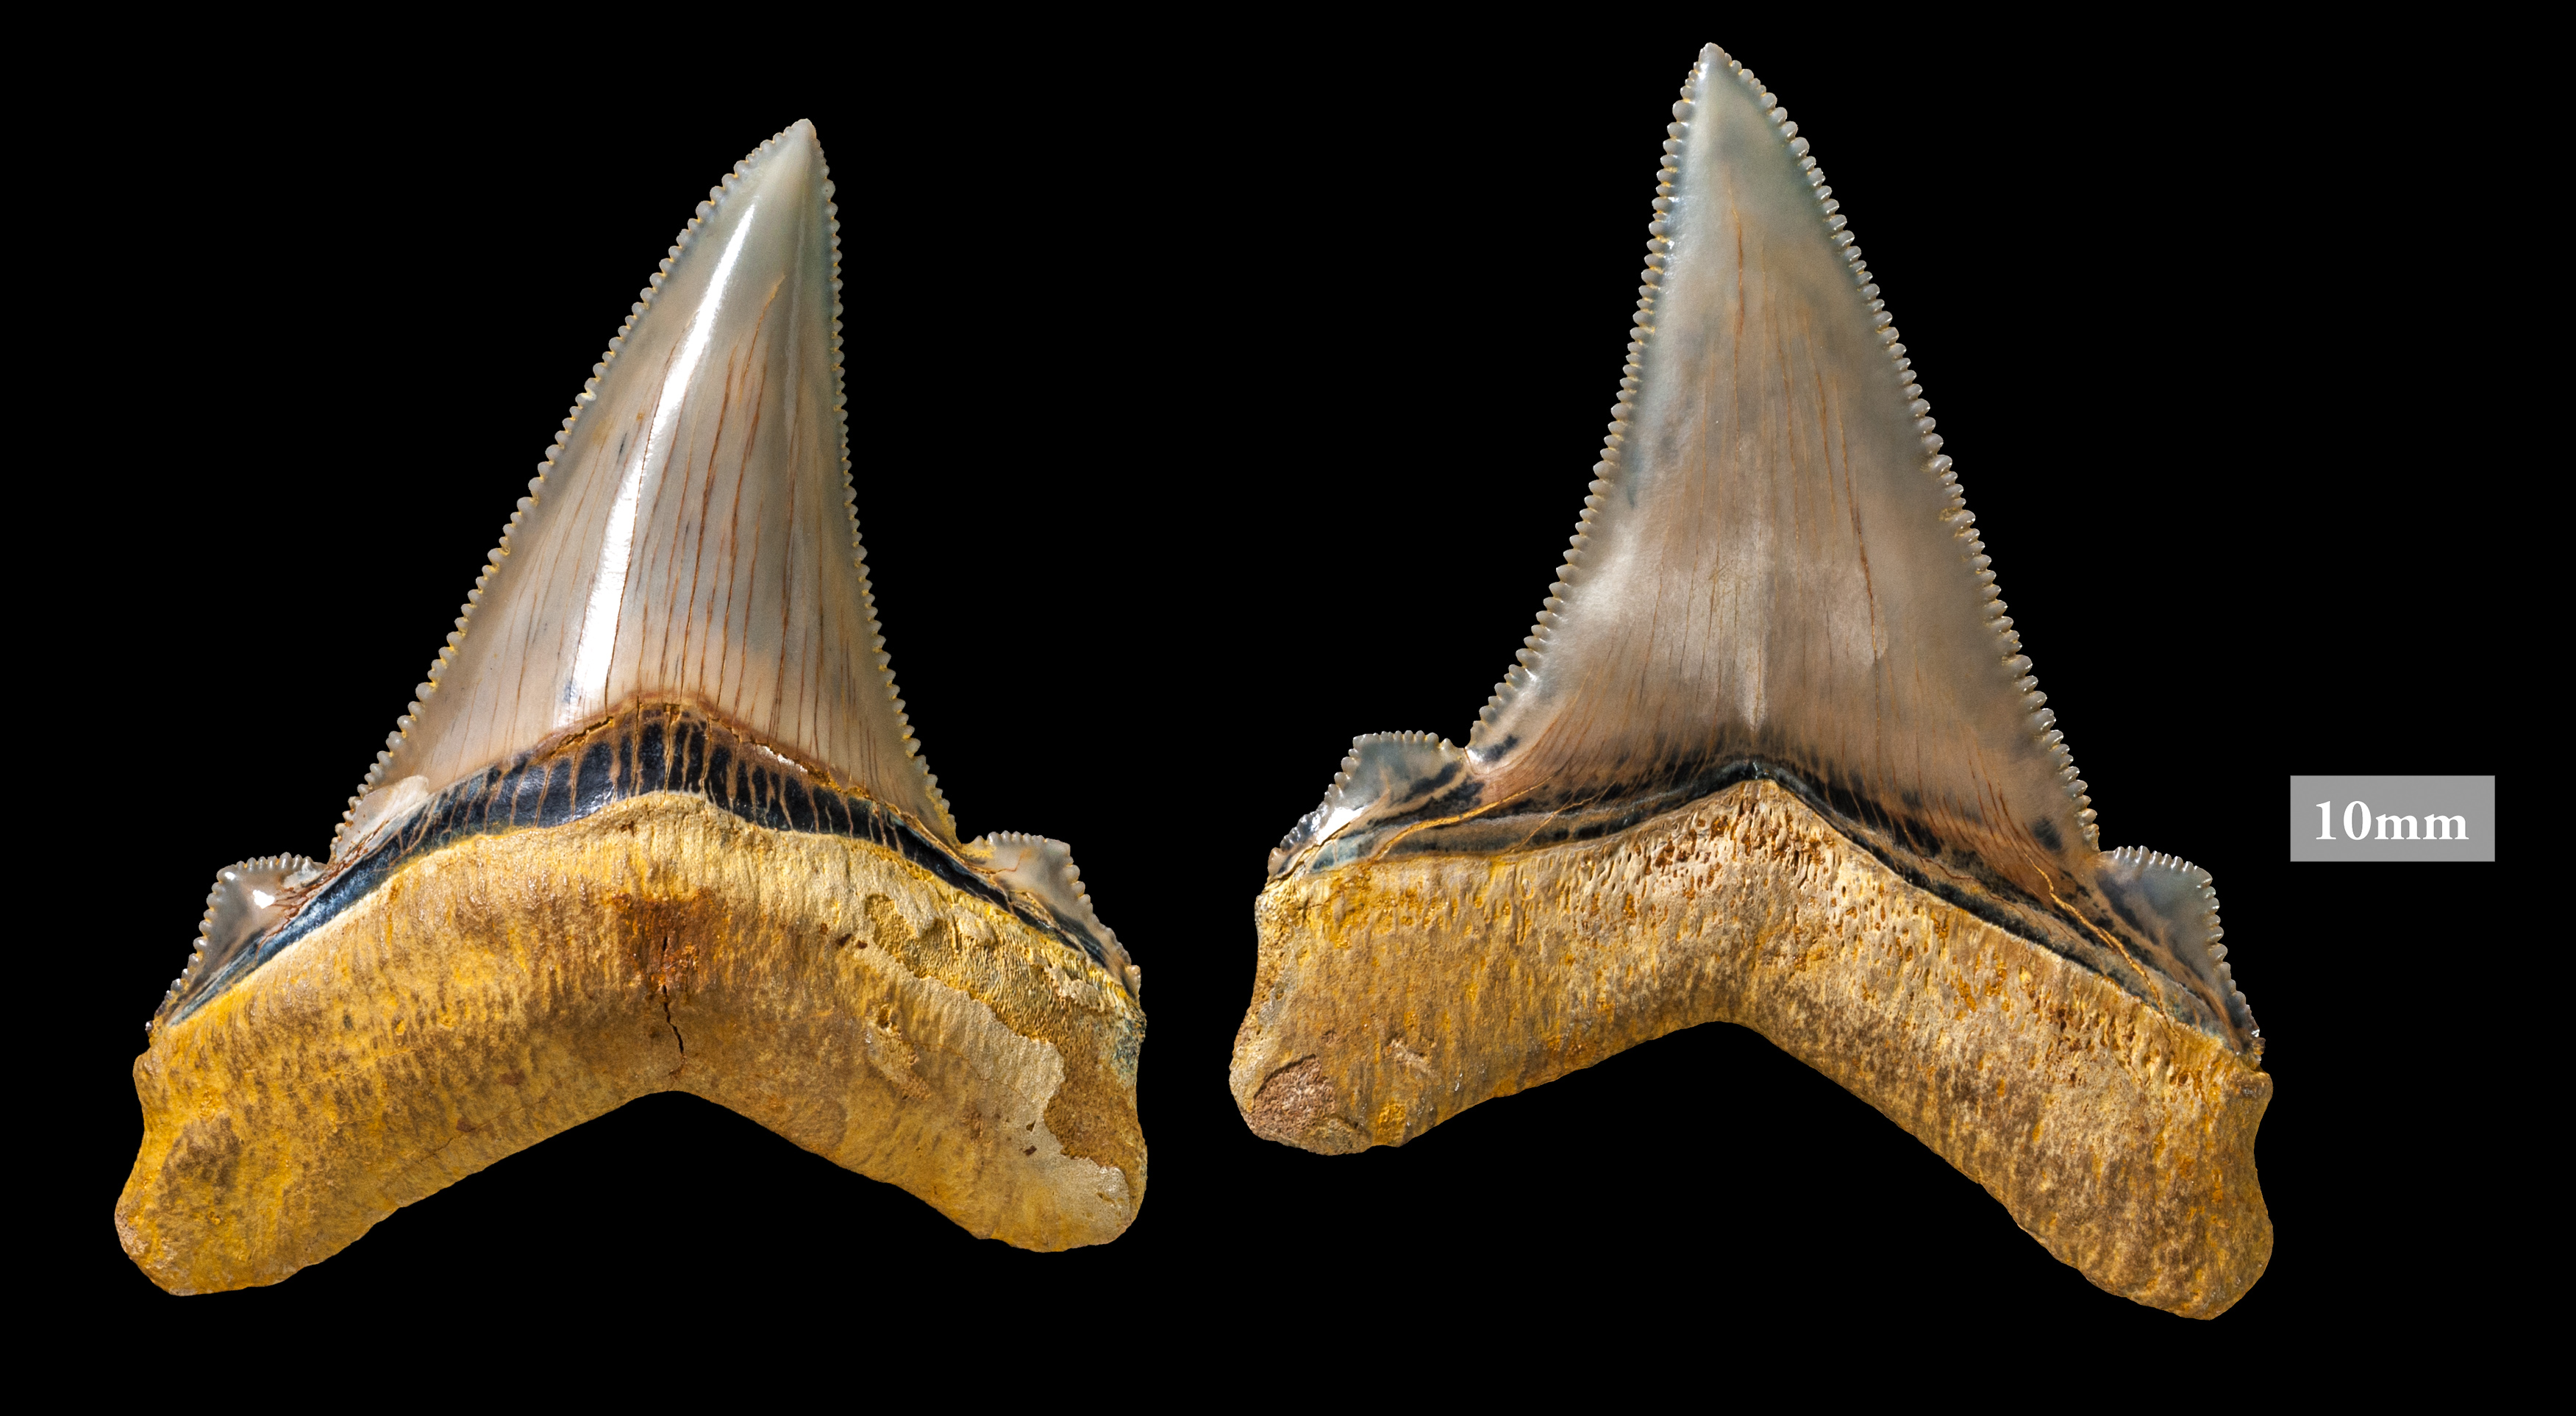 Victorian Fossil Find Uncovers Prehistoric Leftovers of Colossal Shark  Feast - Museums Victoria